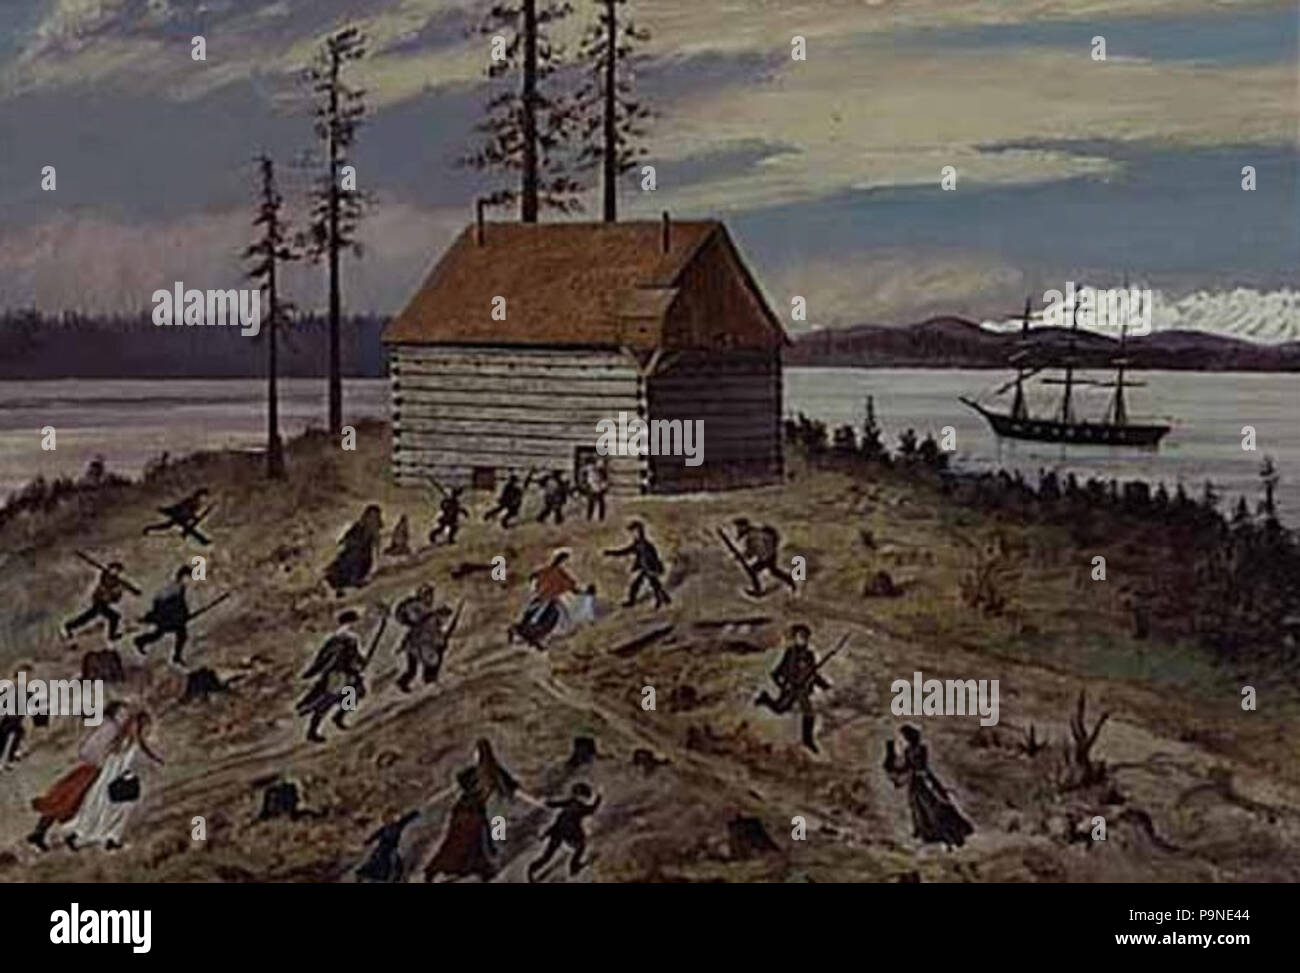 . English: Yakima War - Seattleites evacuate to the town blockhouse as USS Decatur opens fire on advancing tribal forces. - Emily Inez Denny was the eldest child of early settler David Denny and his wife, Louisa Boren Denny. She was born in 1853, two years after her parents landed at Alki. During her life, Denny painted and drew many scenes of Seattle's early history. One of her many paintings showed the Battle of Seattle which took place on January 26, 1856. Emily Inez Denny's painting shows Seattle's white settlers running to safety in the city's blockhouse. The ship 'Decatur' sits offshore  Stock Photo